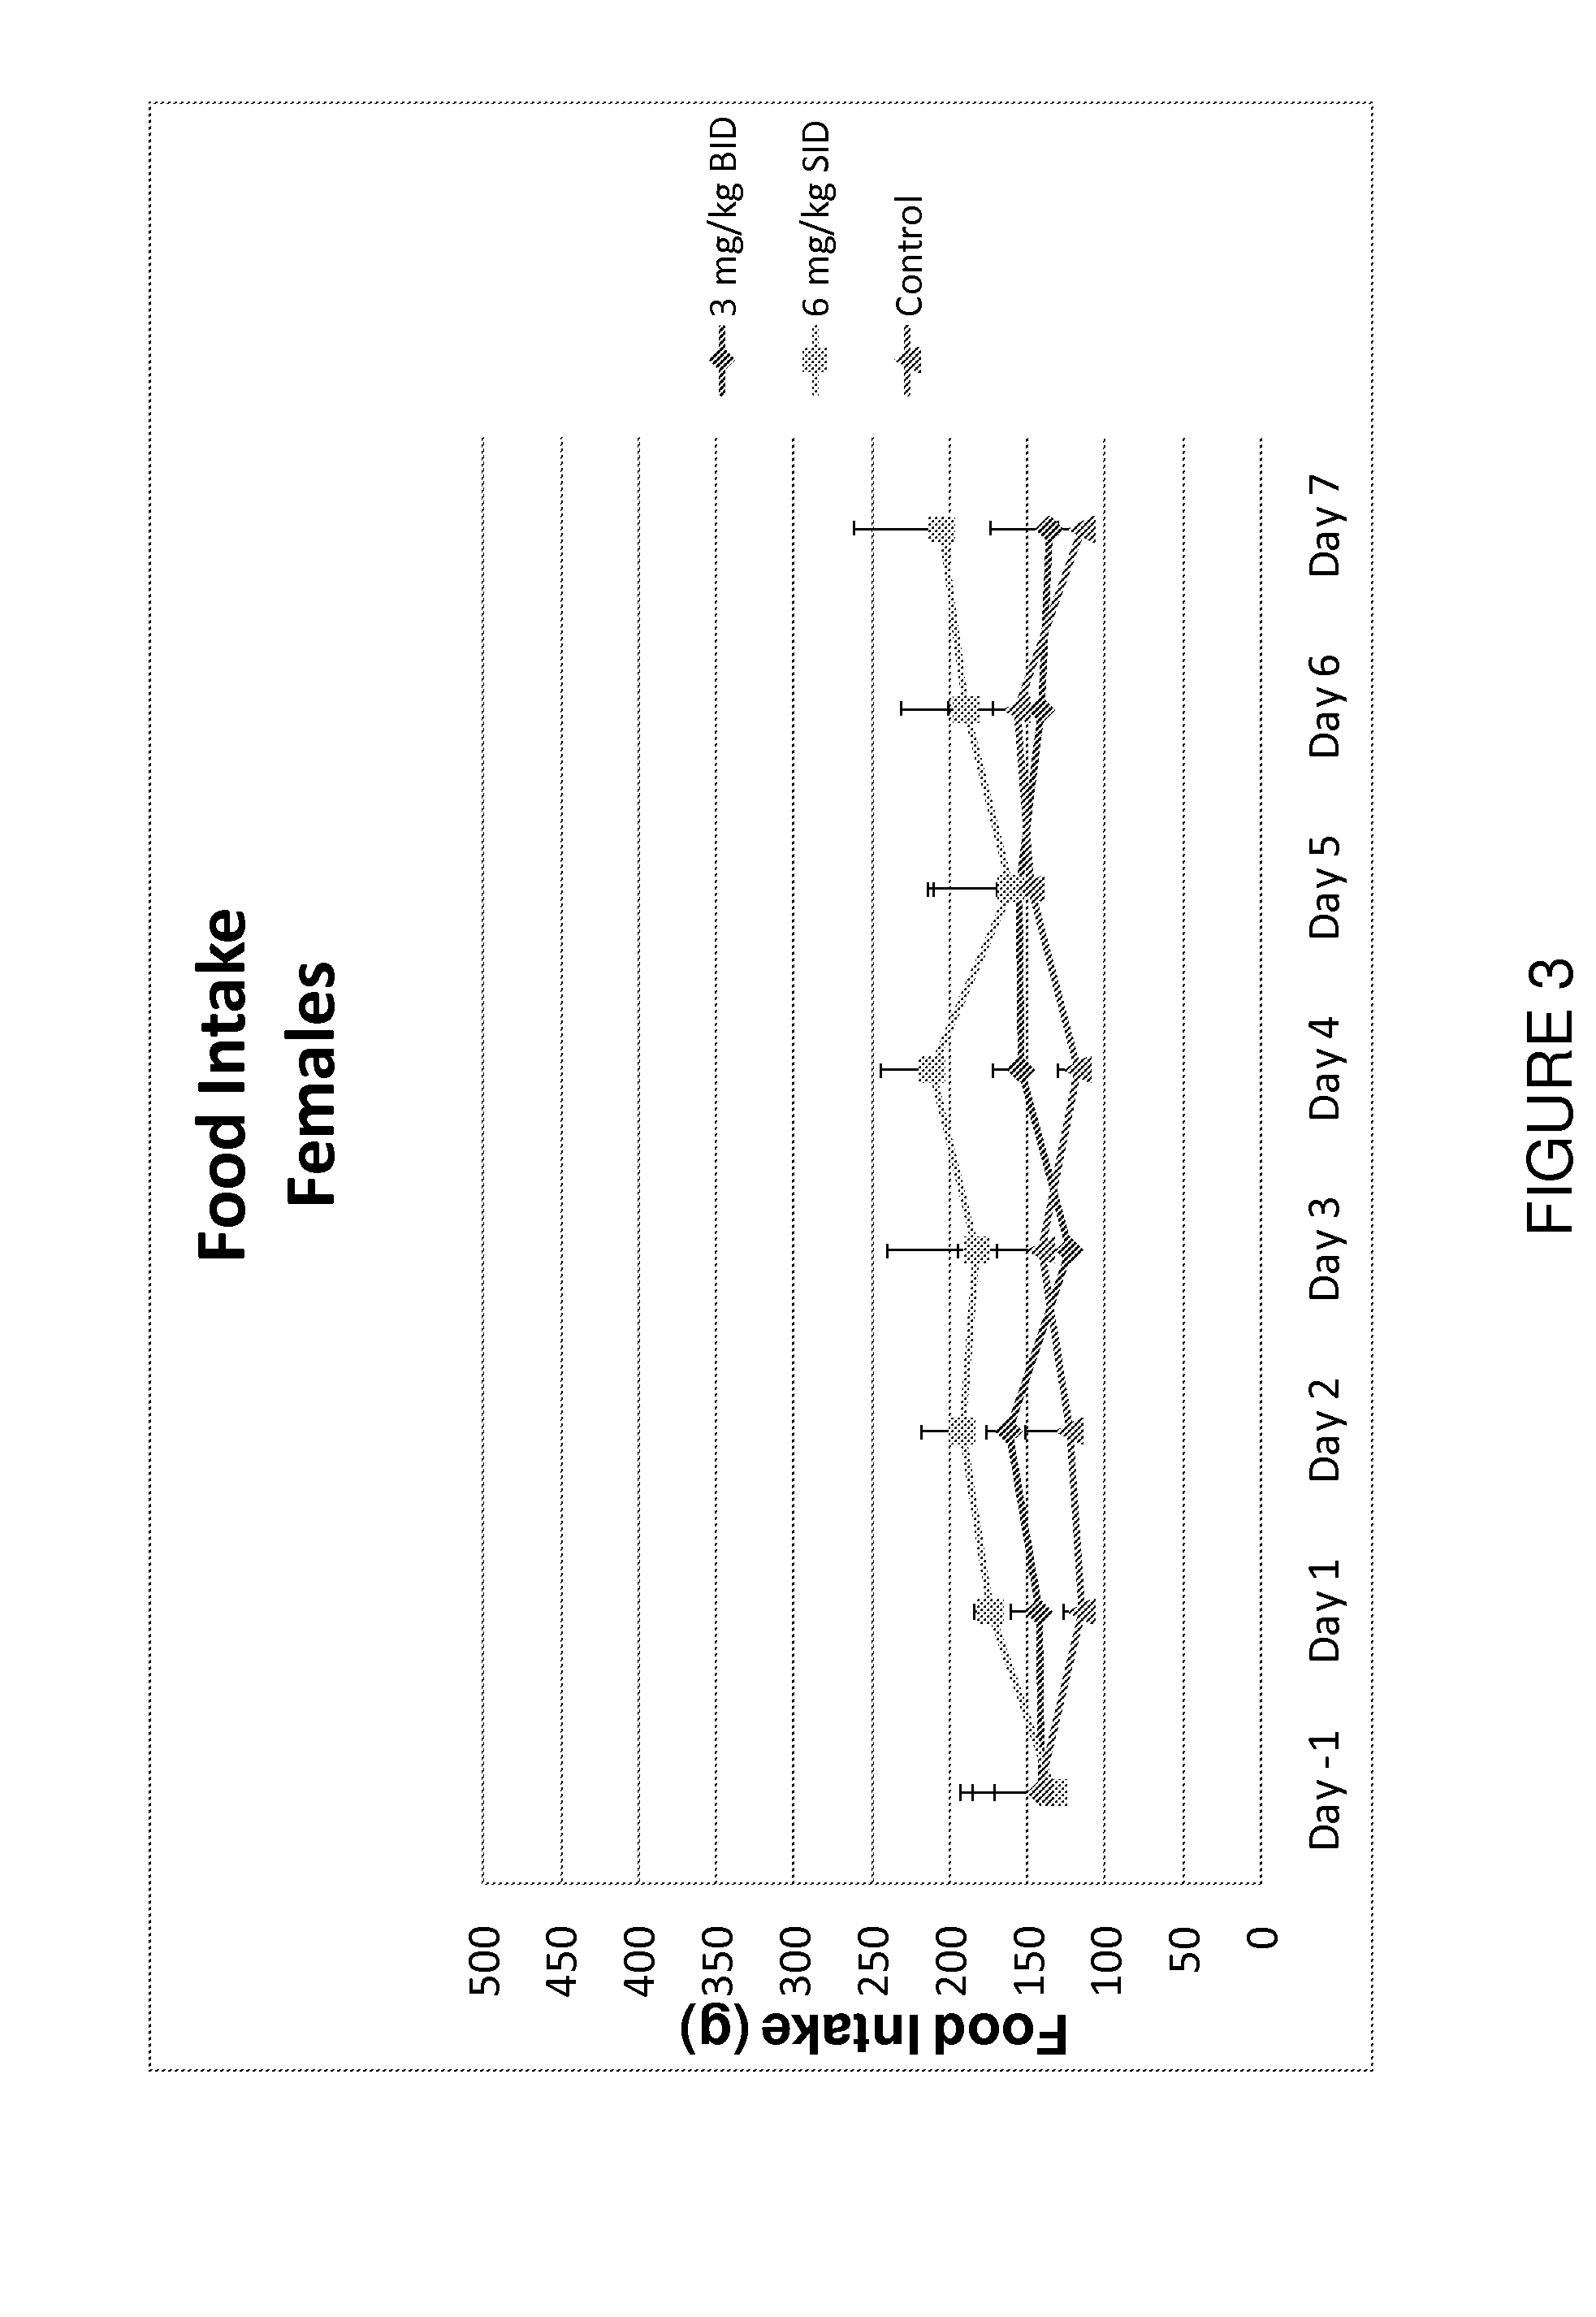 Compositions and methods of use of an inappetance-controlling compound